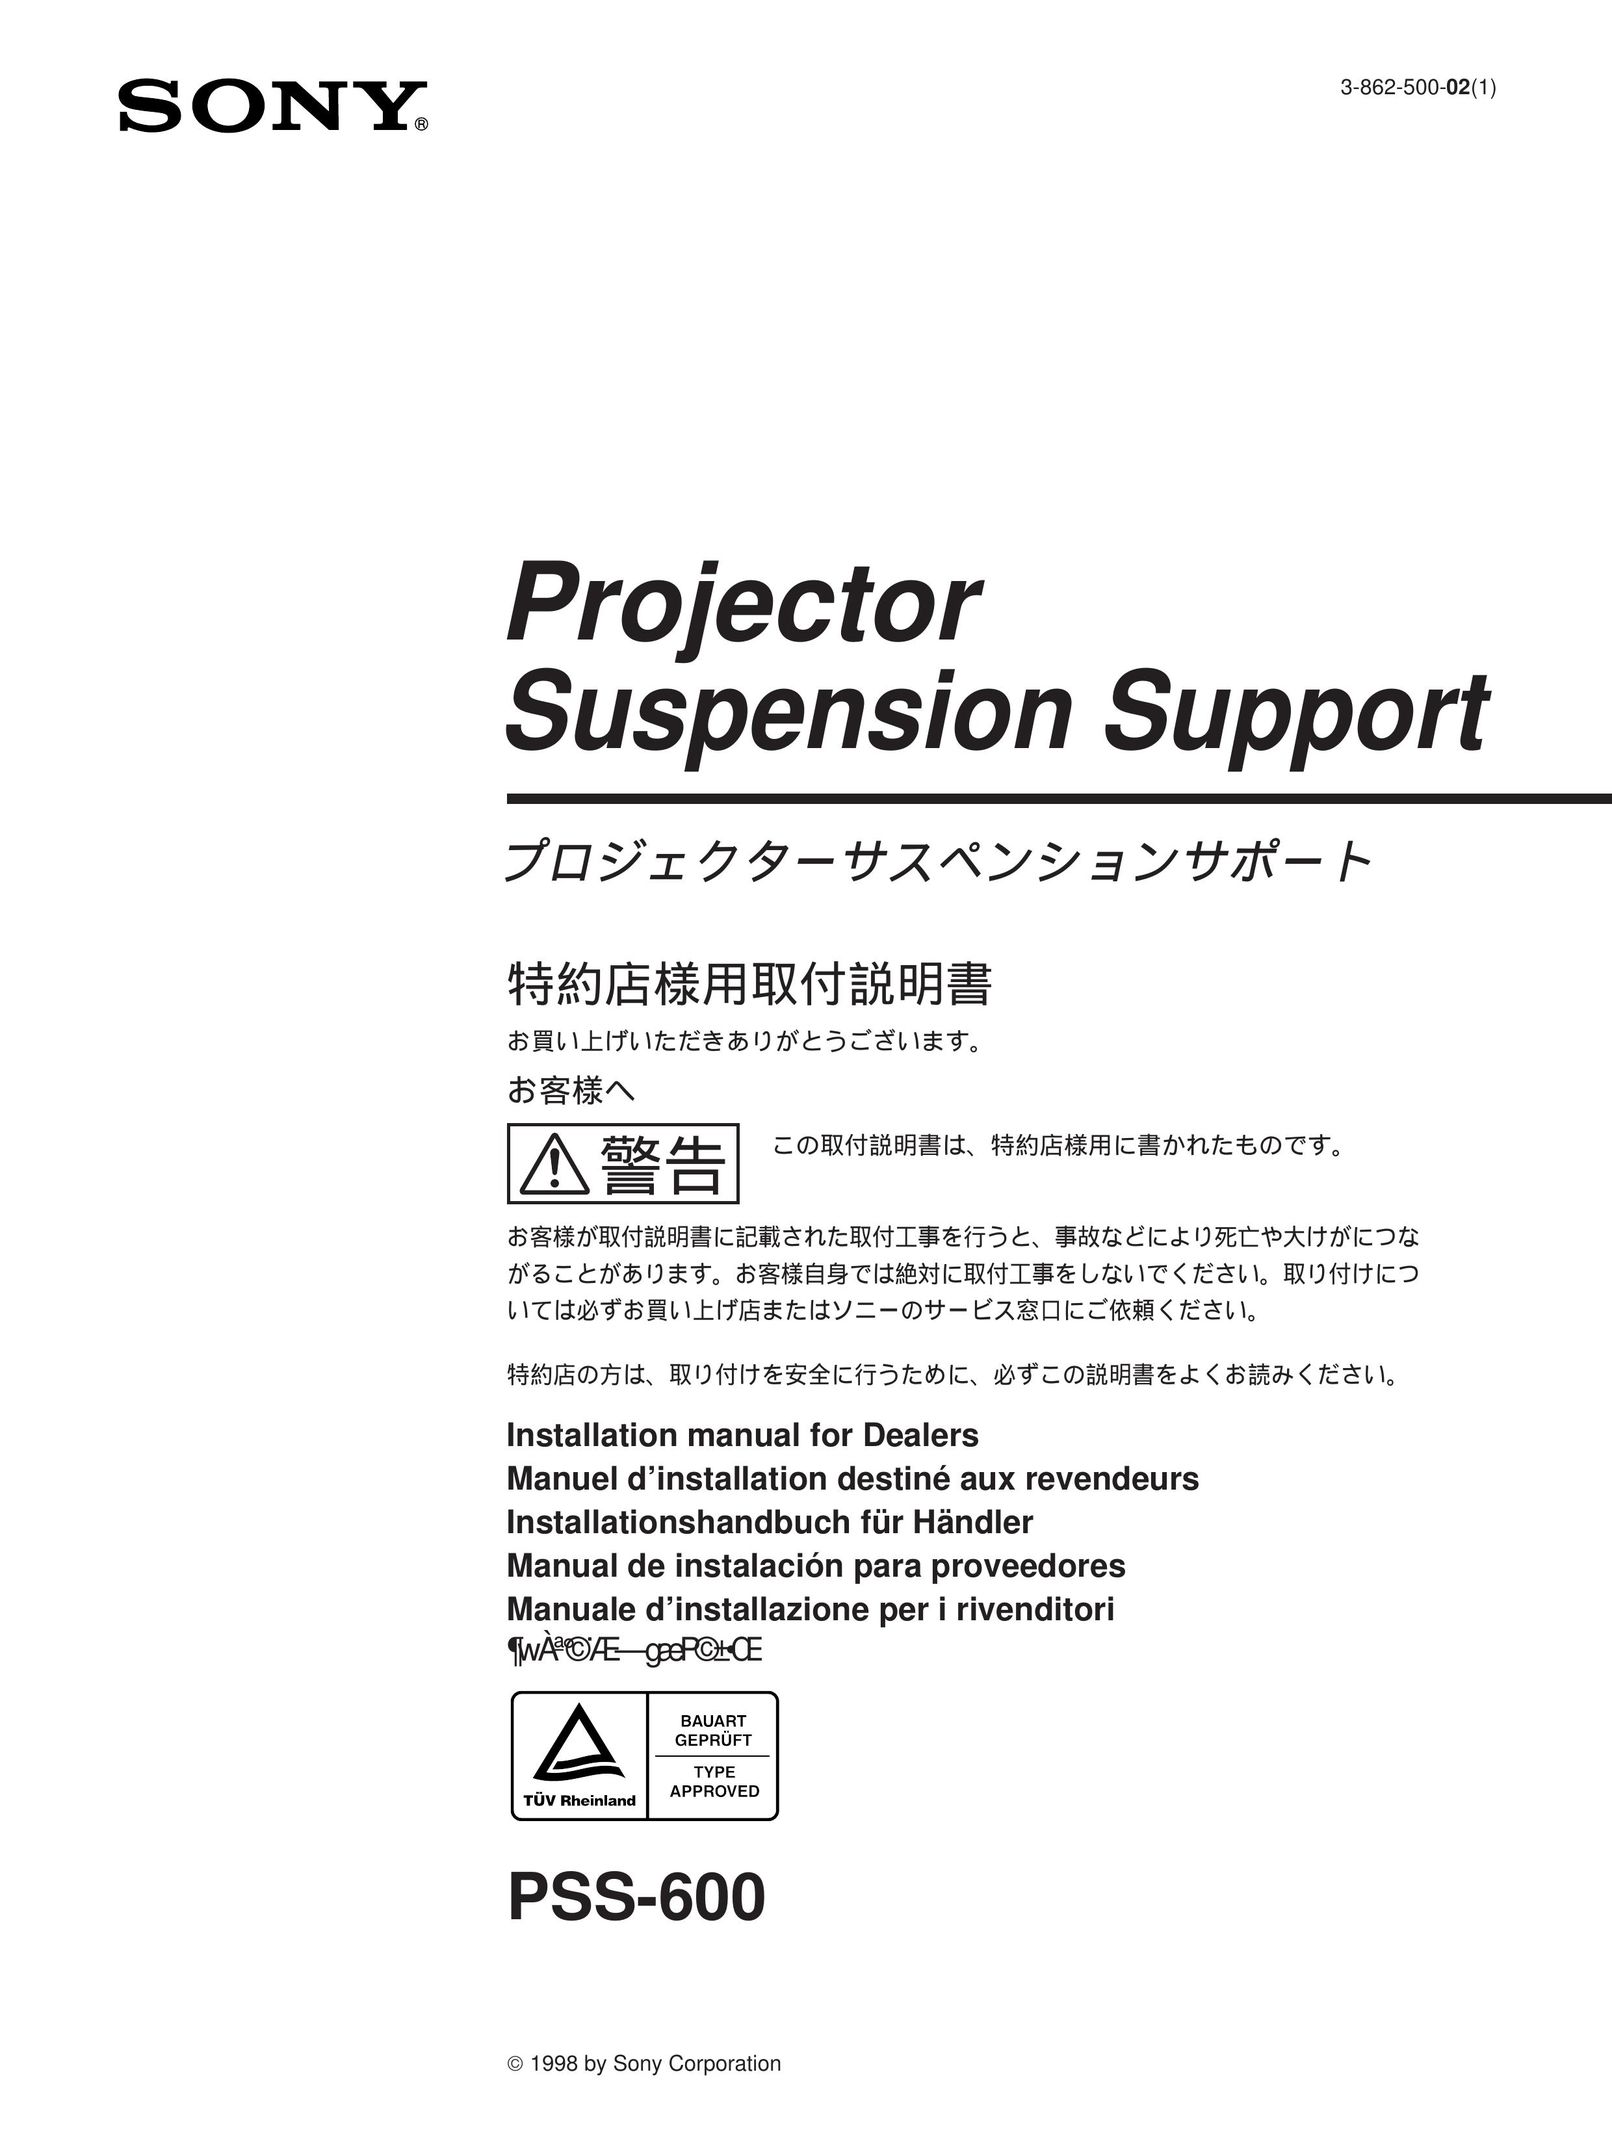 Sony PSS-600 Projector Accessories User Manual